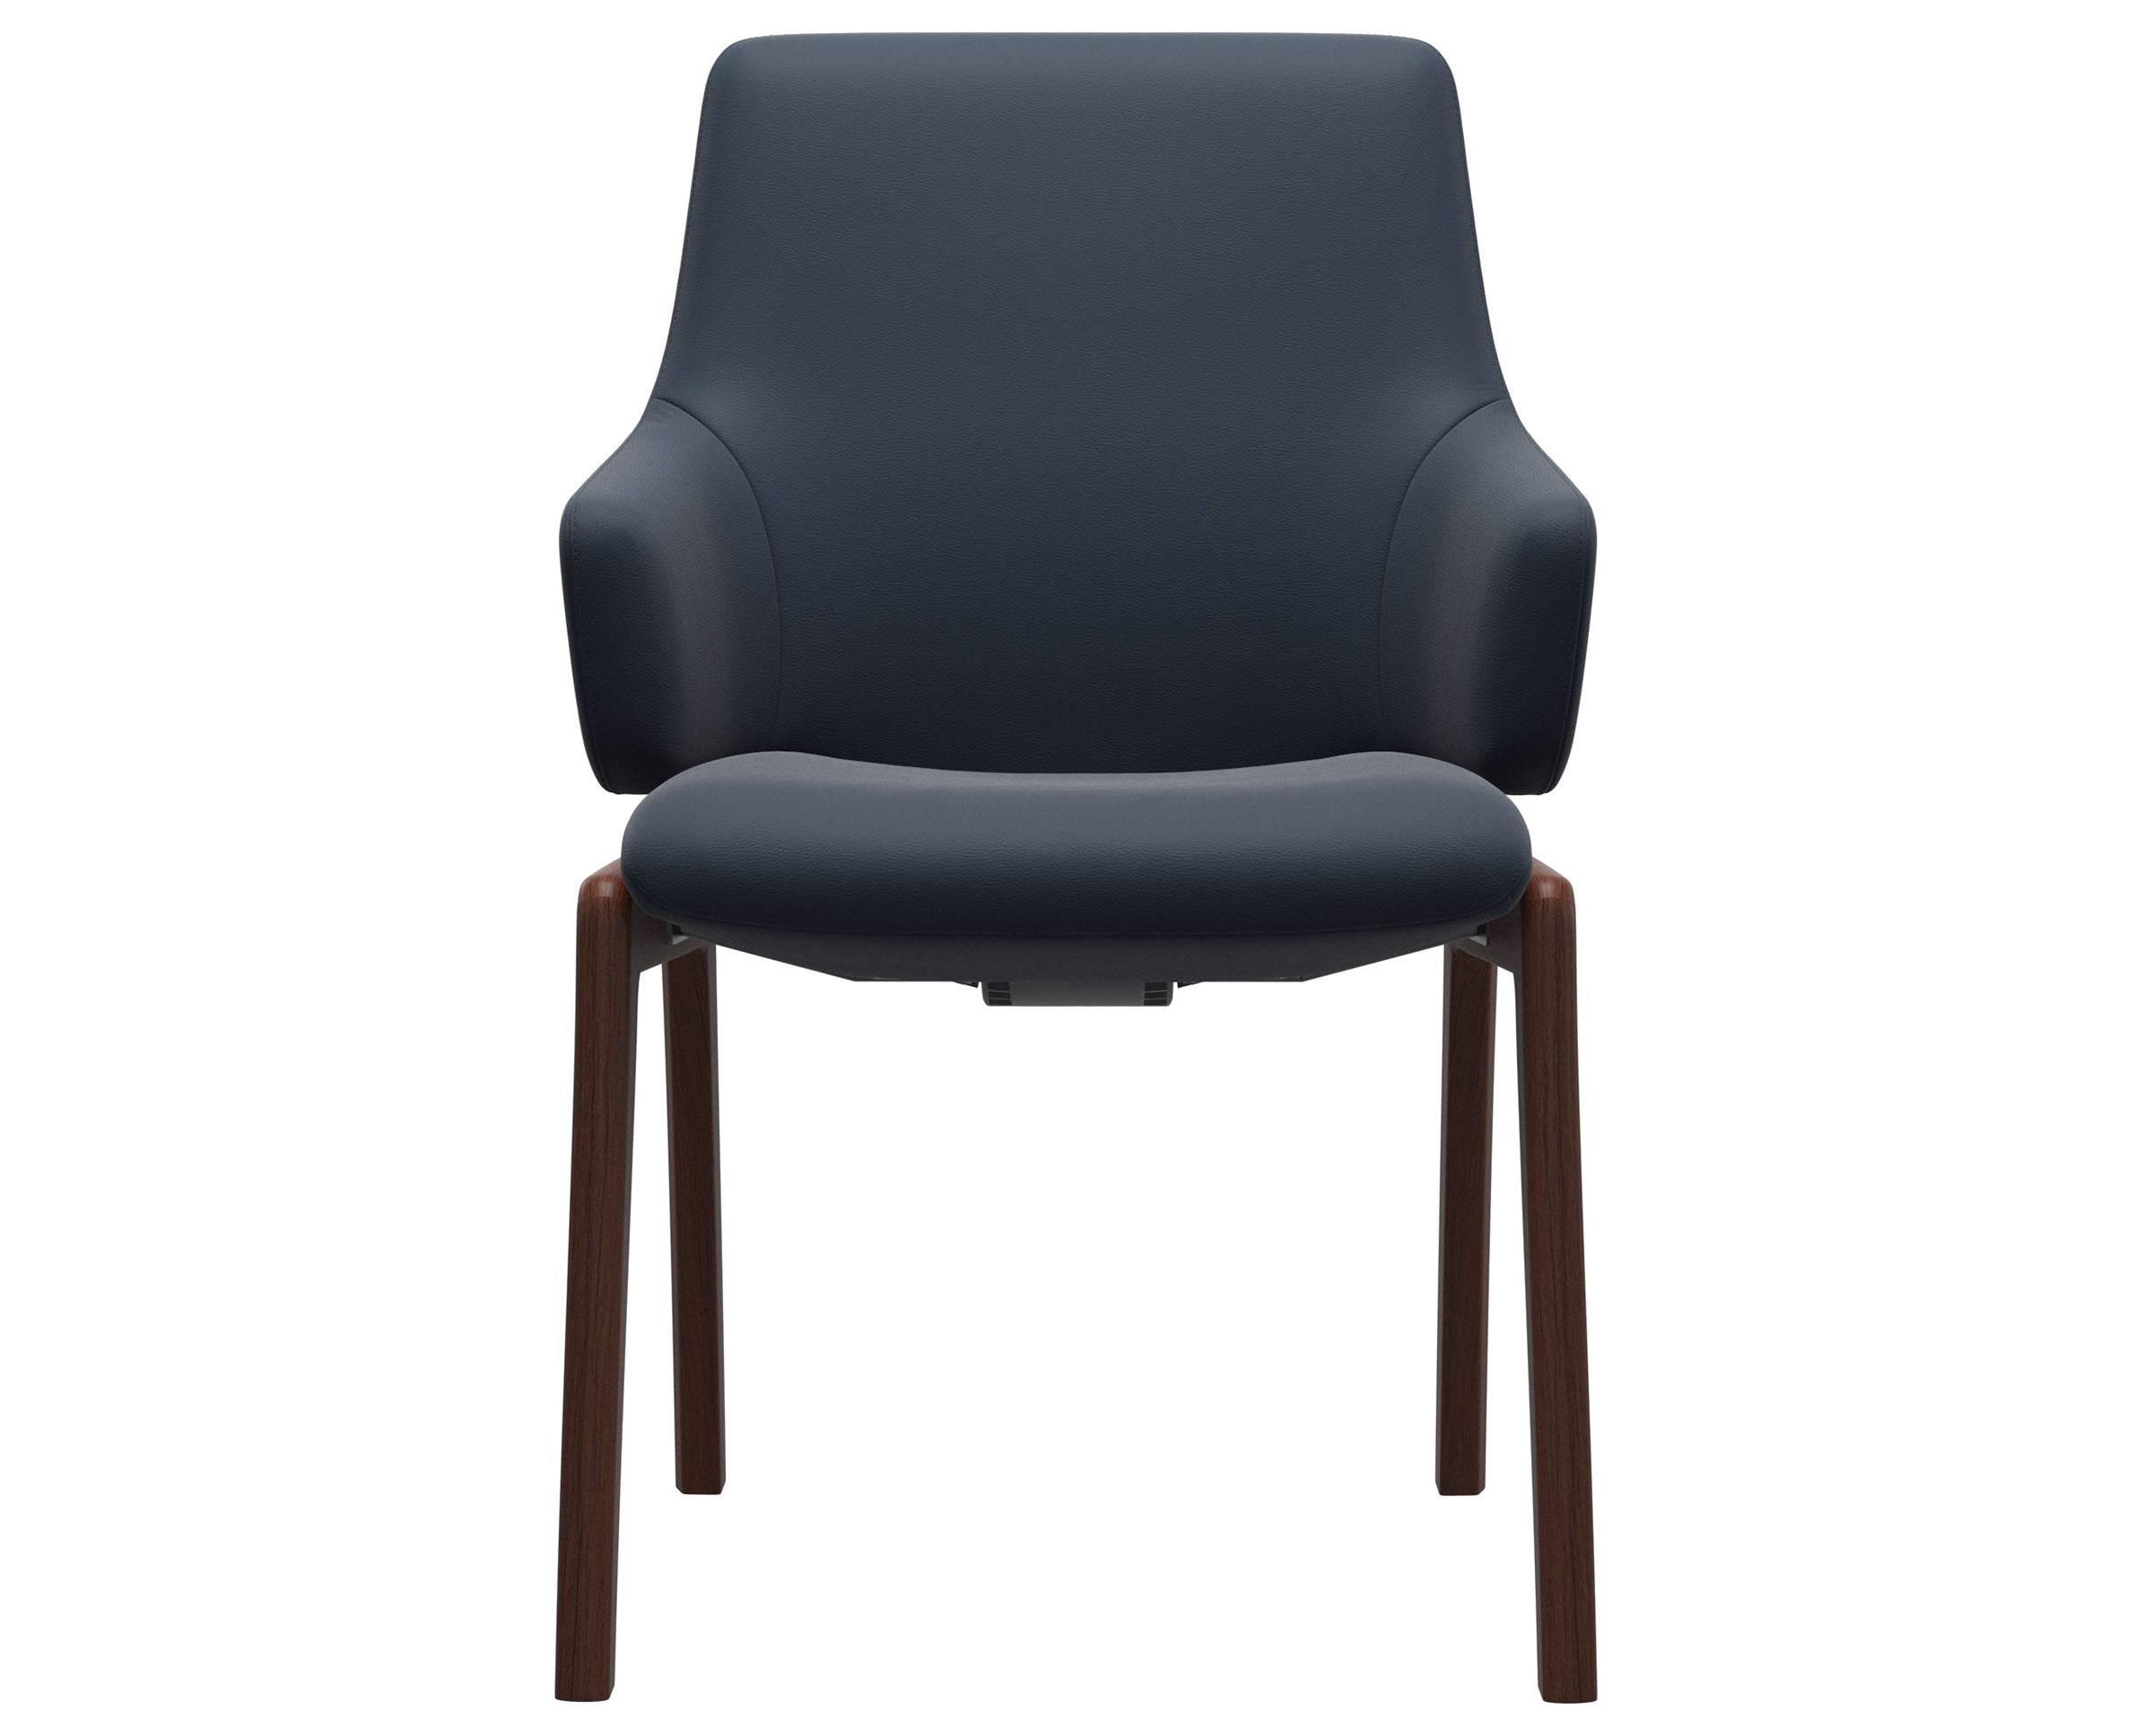 Paloma Leather Oxford Blue and Walnut Base | Stressless Laurel Low Back D100 Dining Chair w/Arms | Valley Ridge Furniture